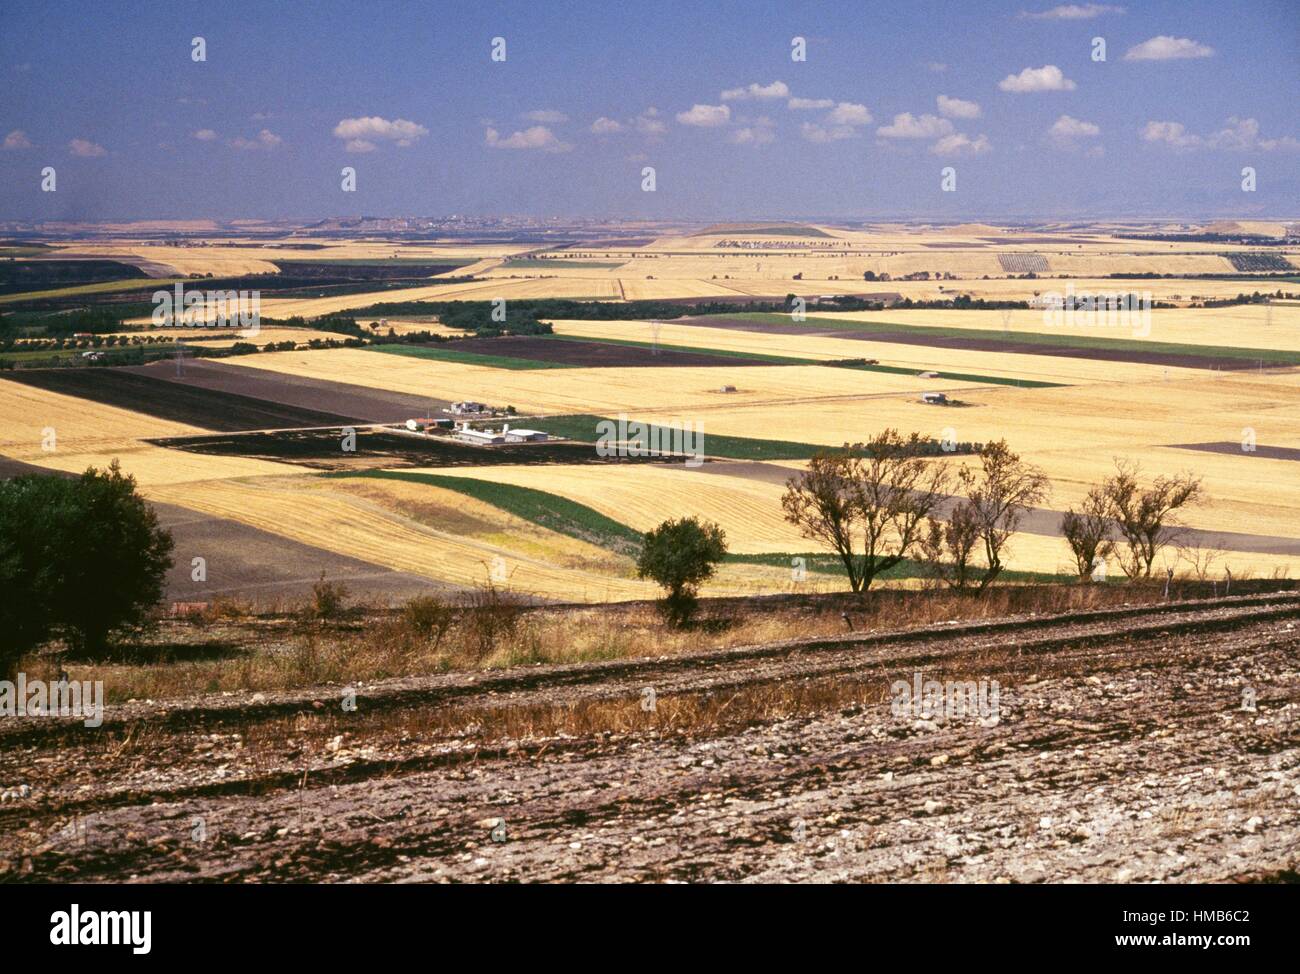 Landscape with cultivated fields on the Tavoliere delle Puglie plain, Apulia, Italy. Stock Photo